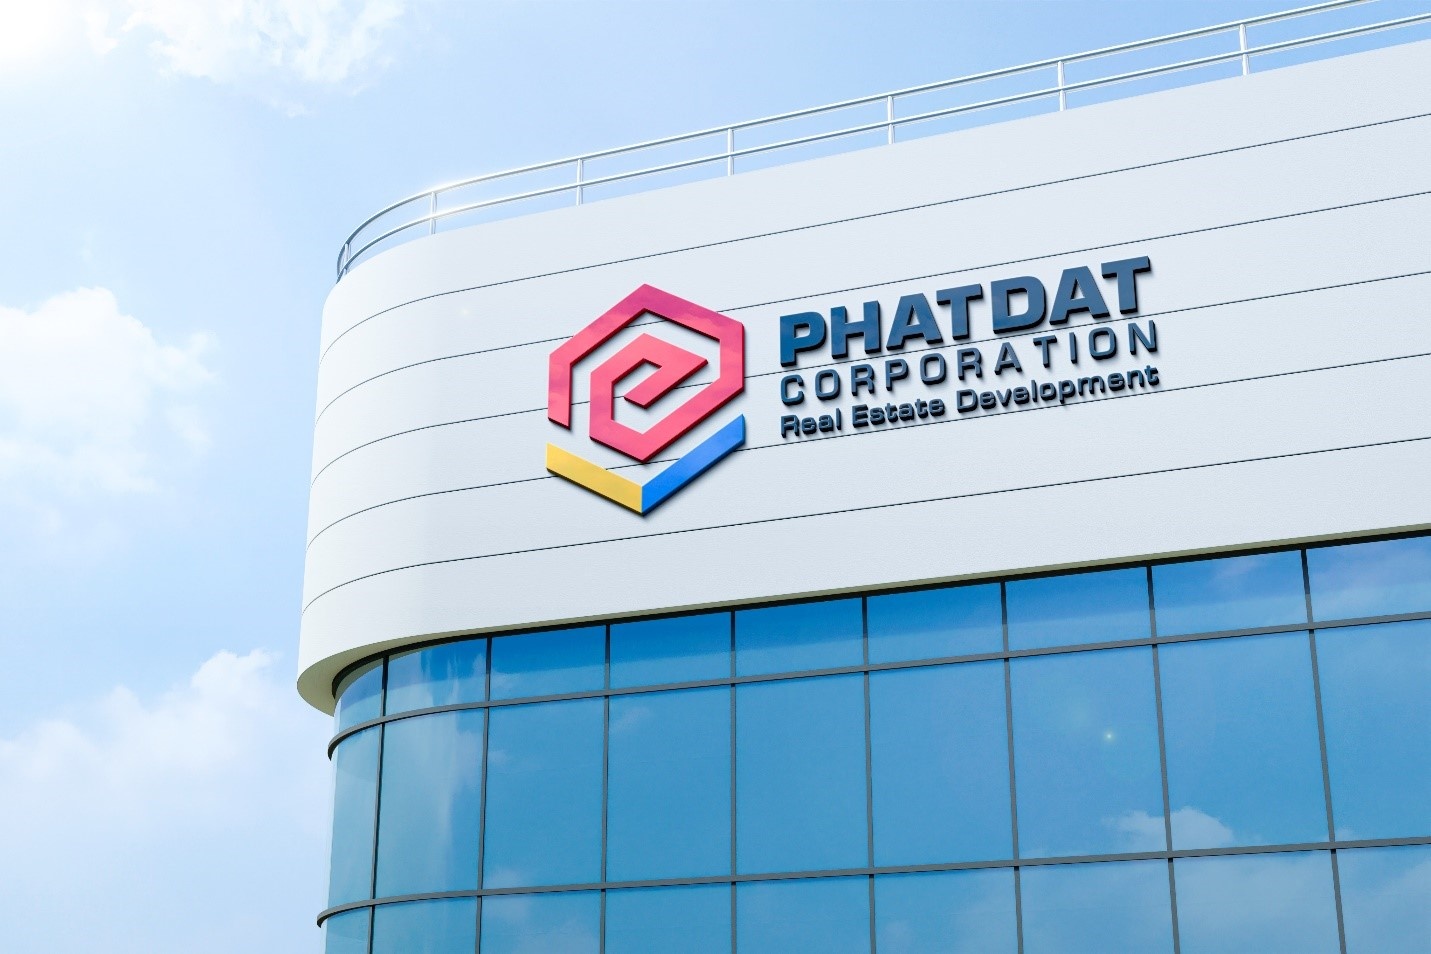 Phat Dat (PDR) named as Top 10 Real Estate Investor